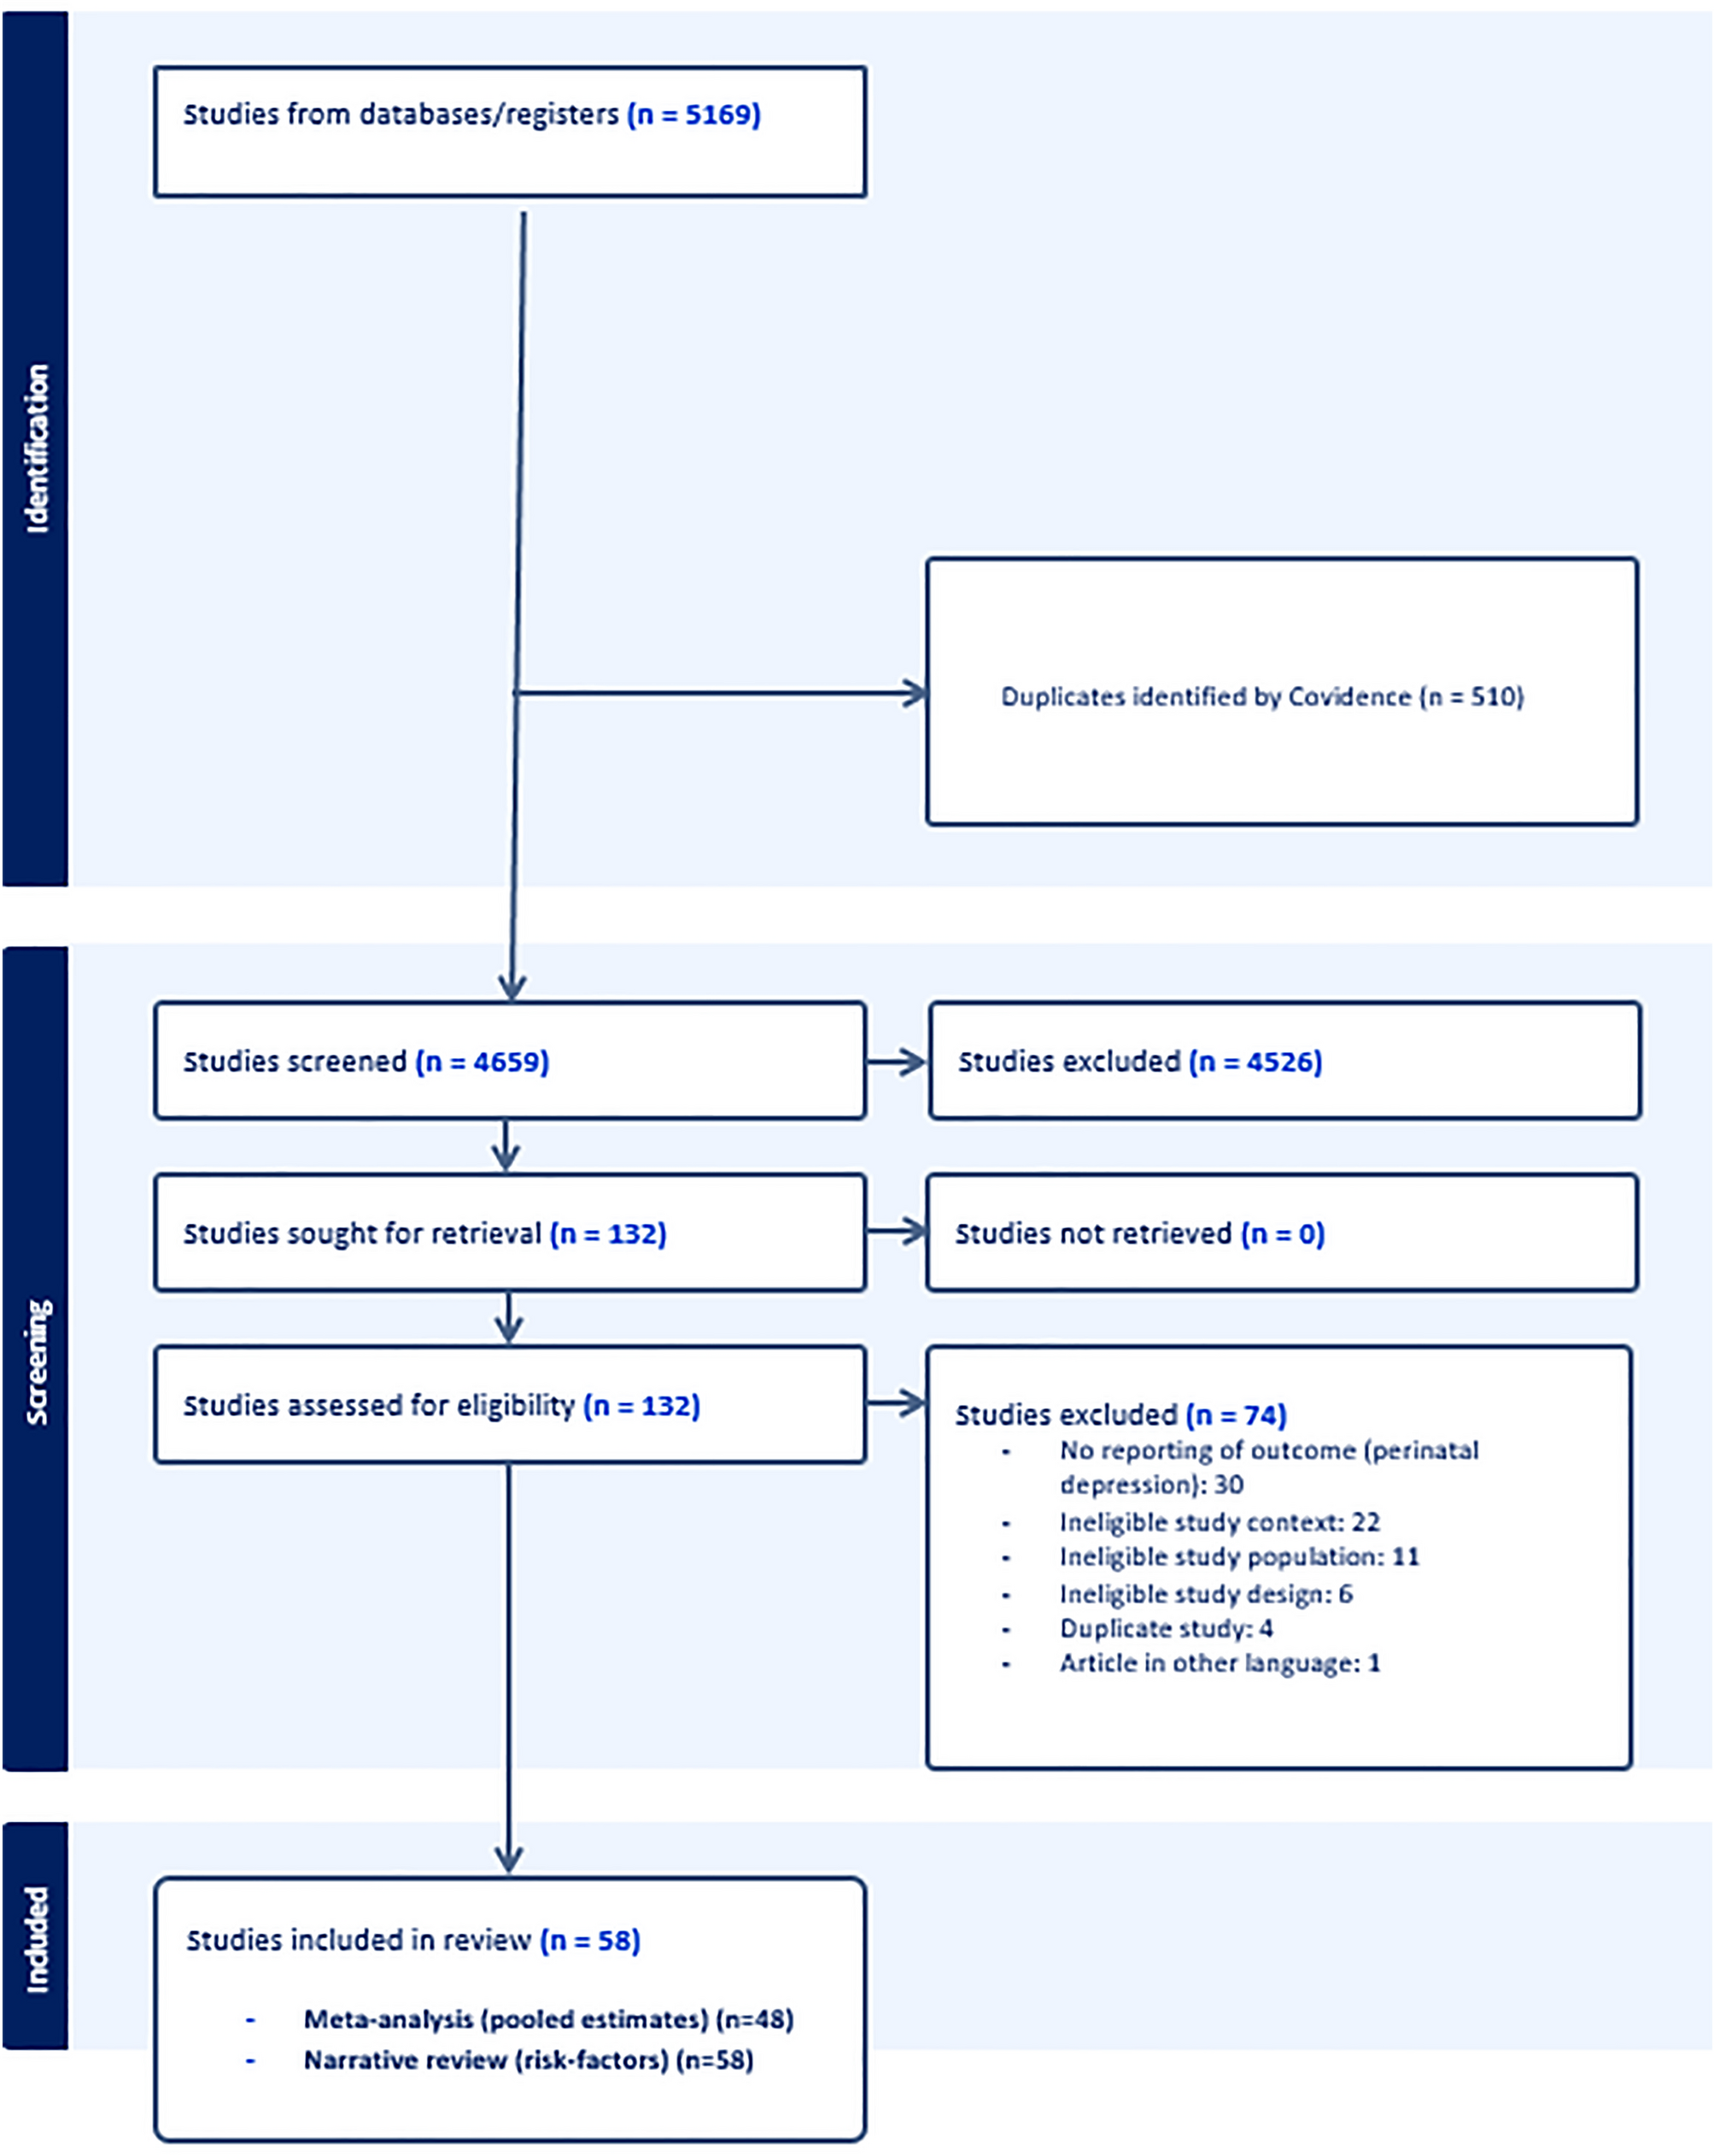 Perinatal depression and its associated risk factors during the COVID-19 pandemic in low- and middle-income countries: a systematic review and meta-analysis